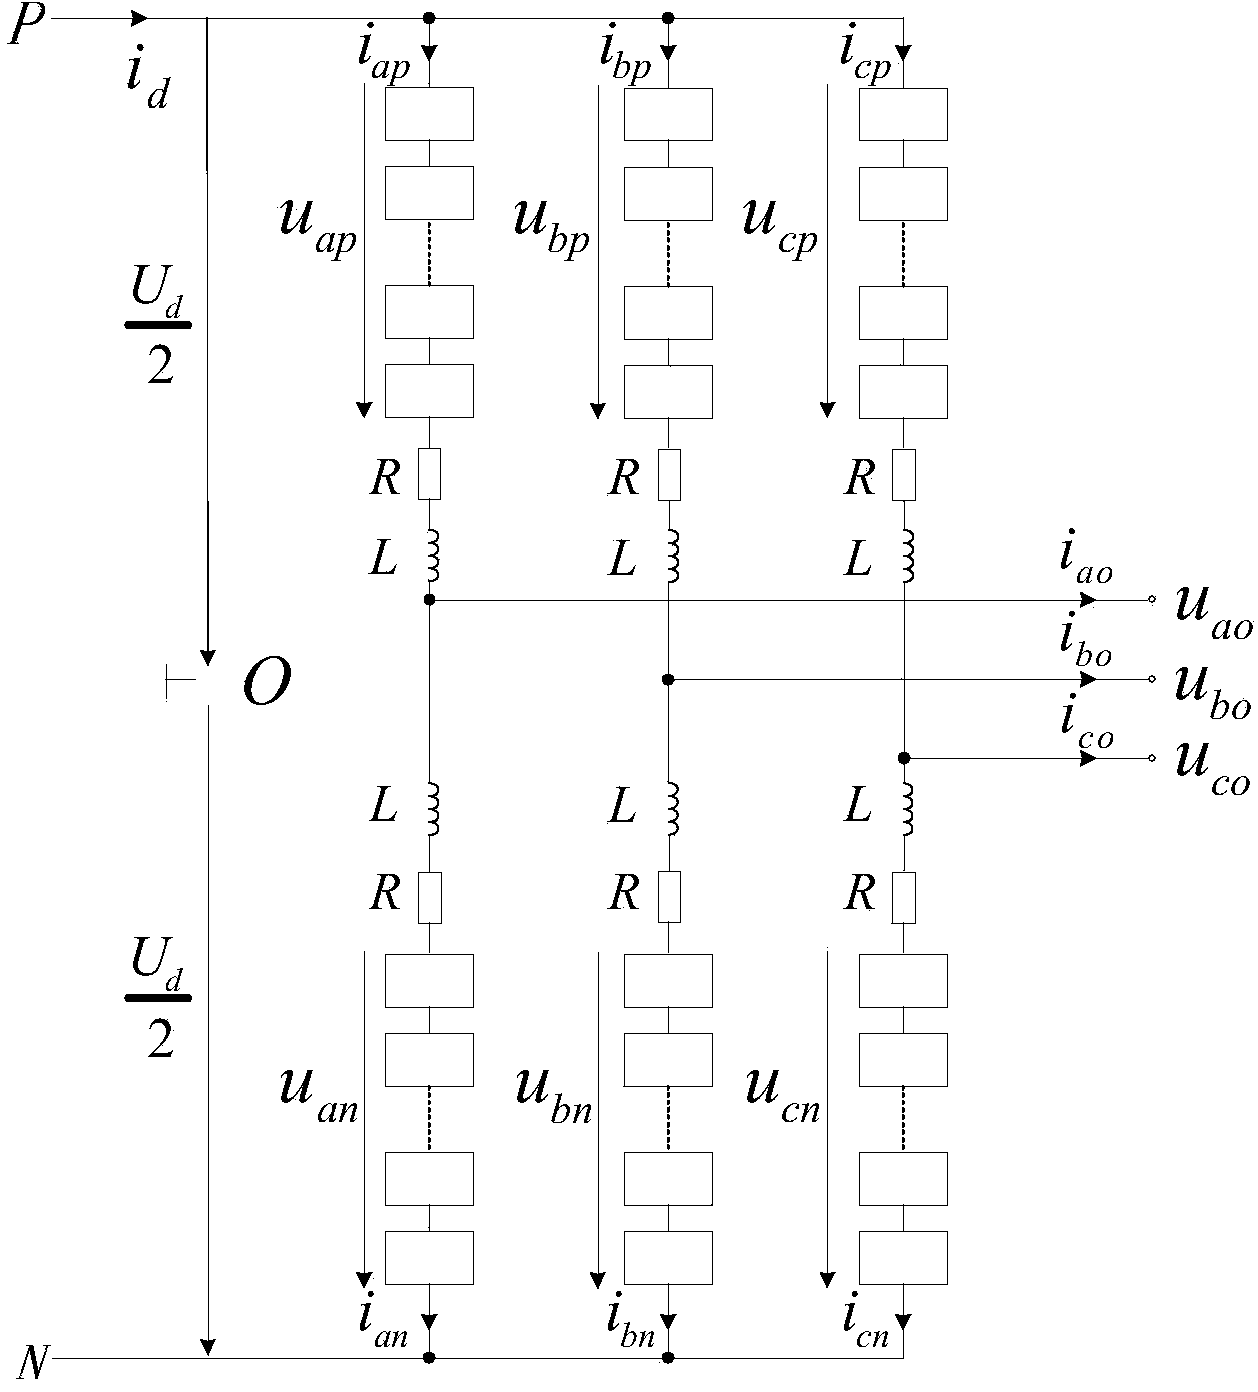 General loop current control method for modular multi-level converter considering low frequency oscillation